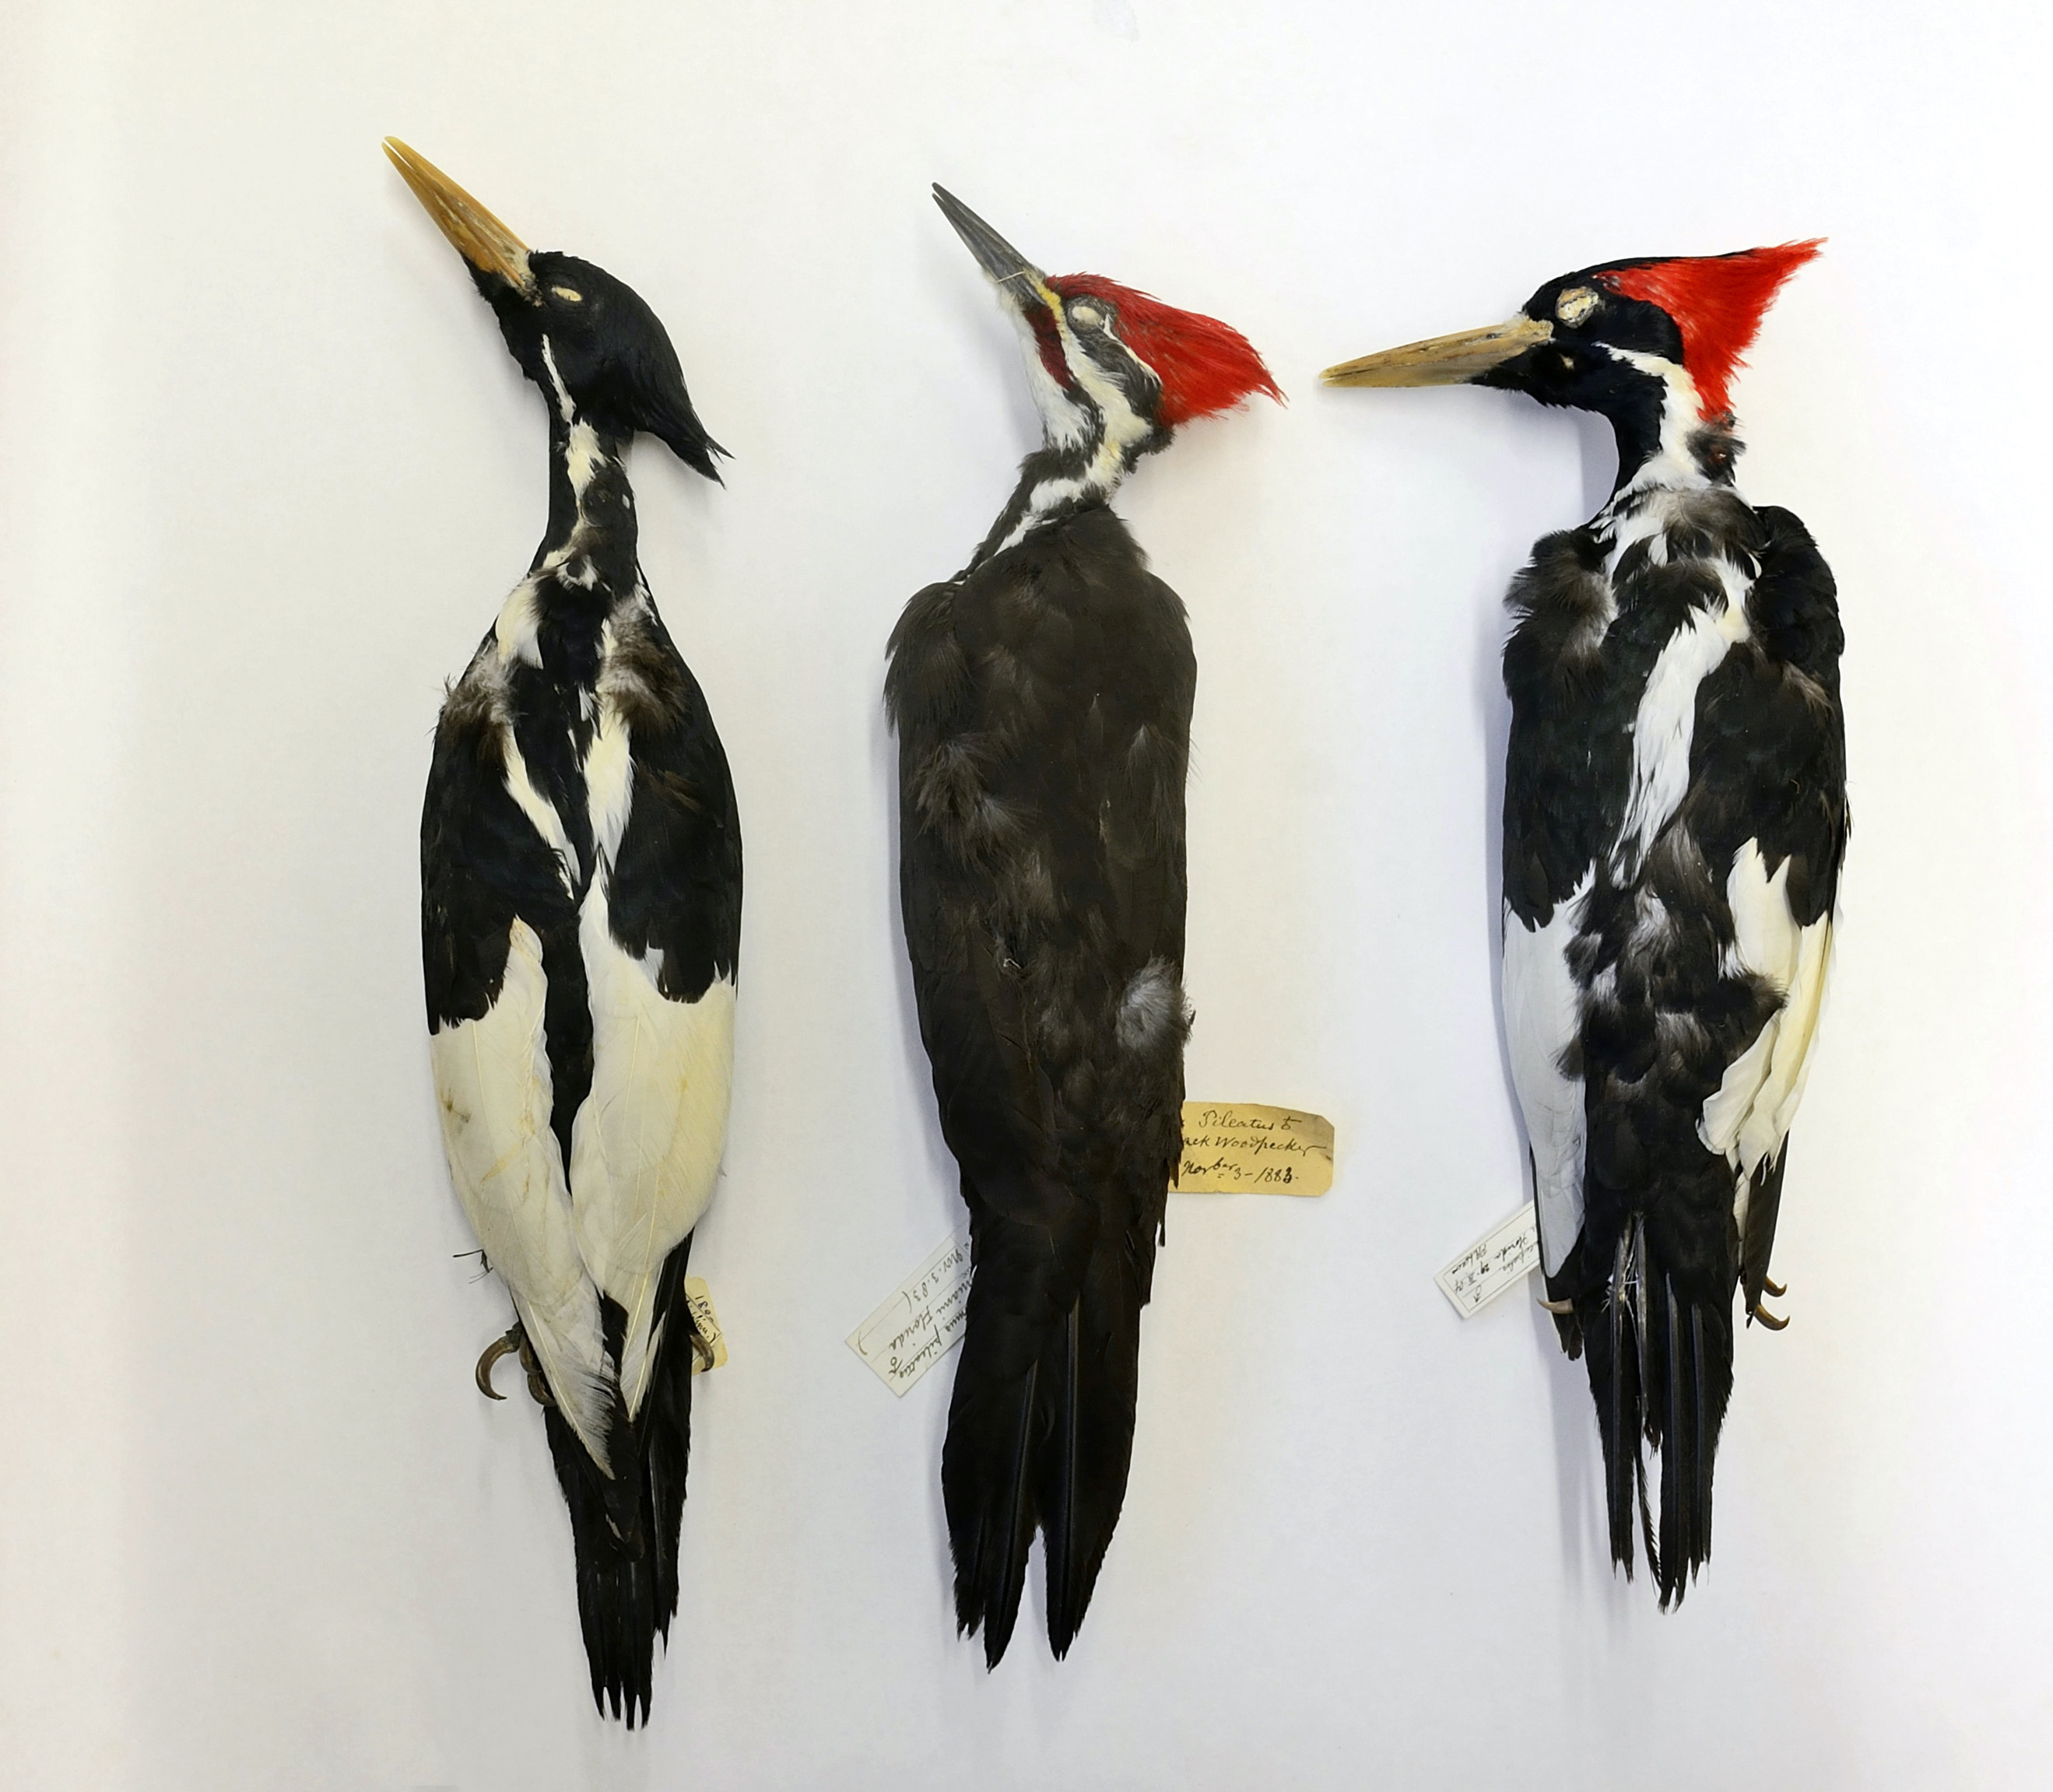 Three dead and preserved woodpeckers lying on a white board.